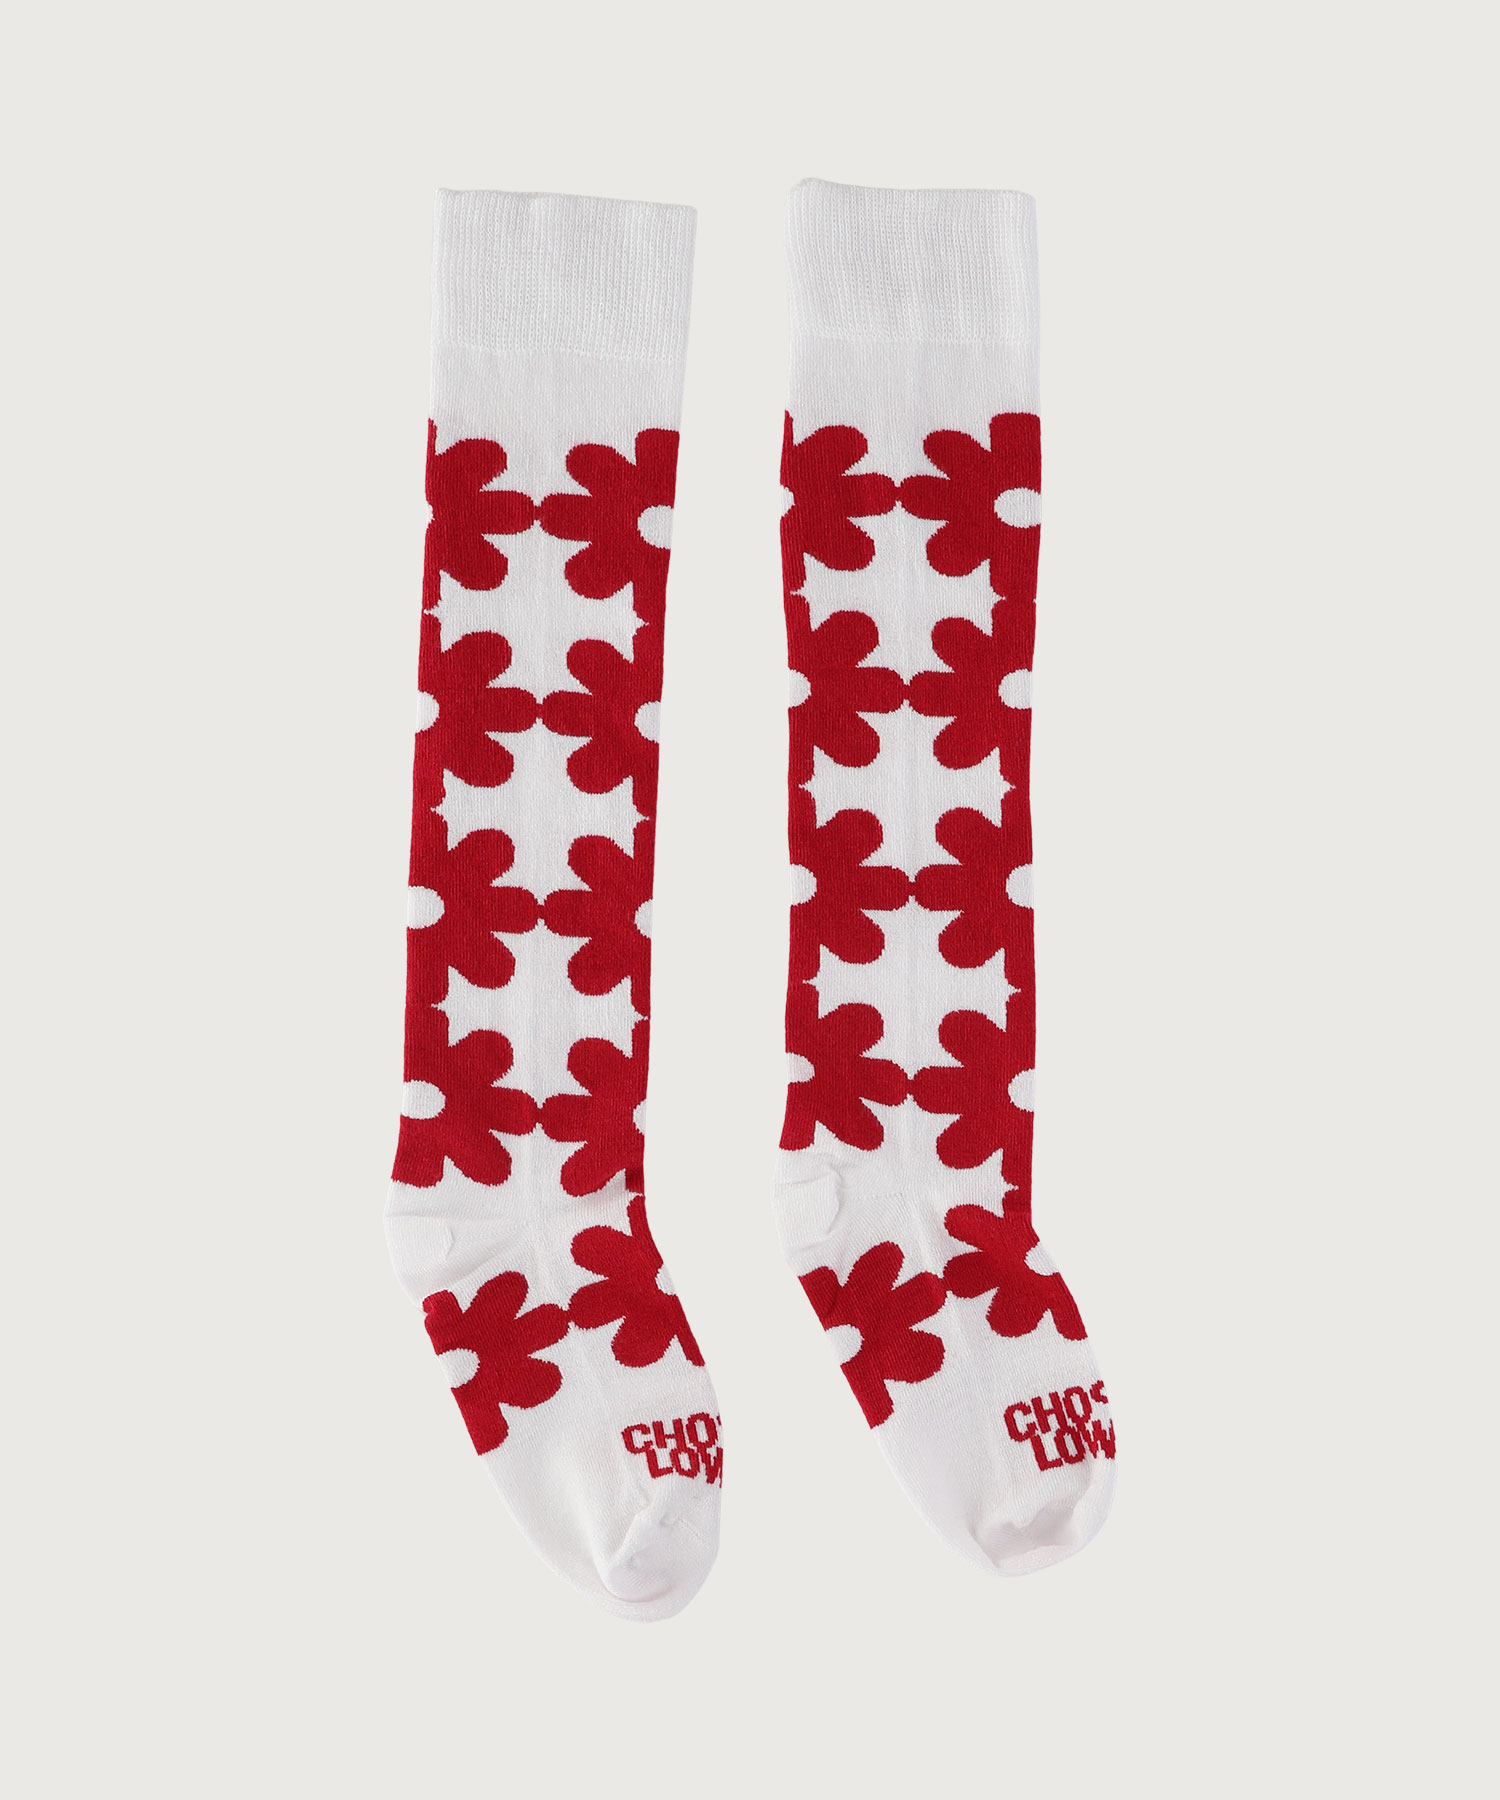 WHITE SOCKS WITH RED FLOWERS